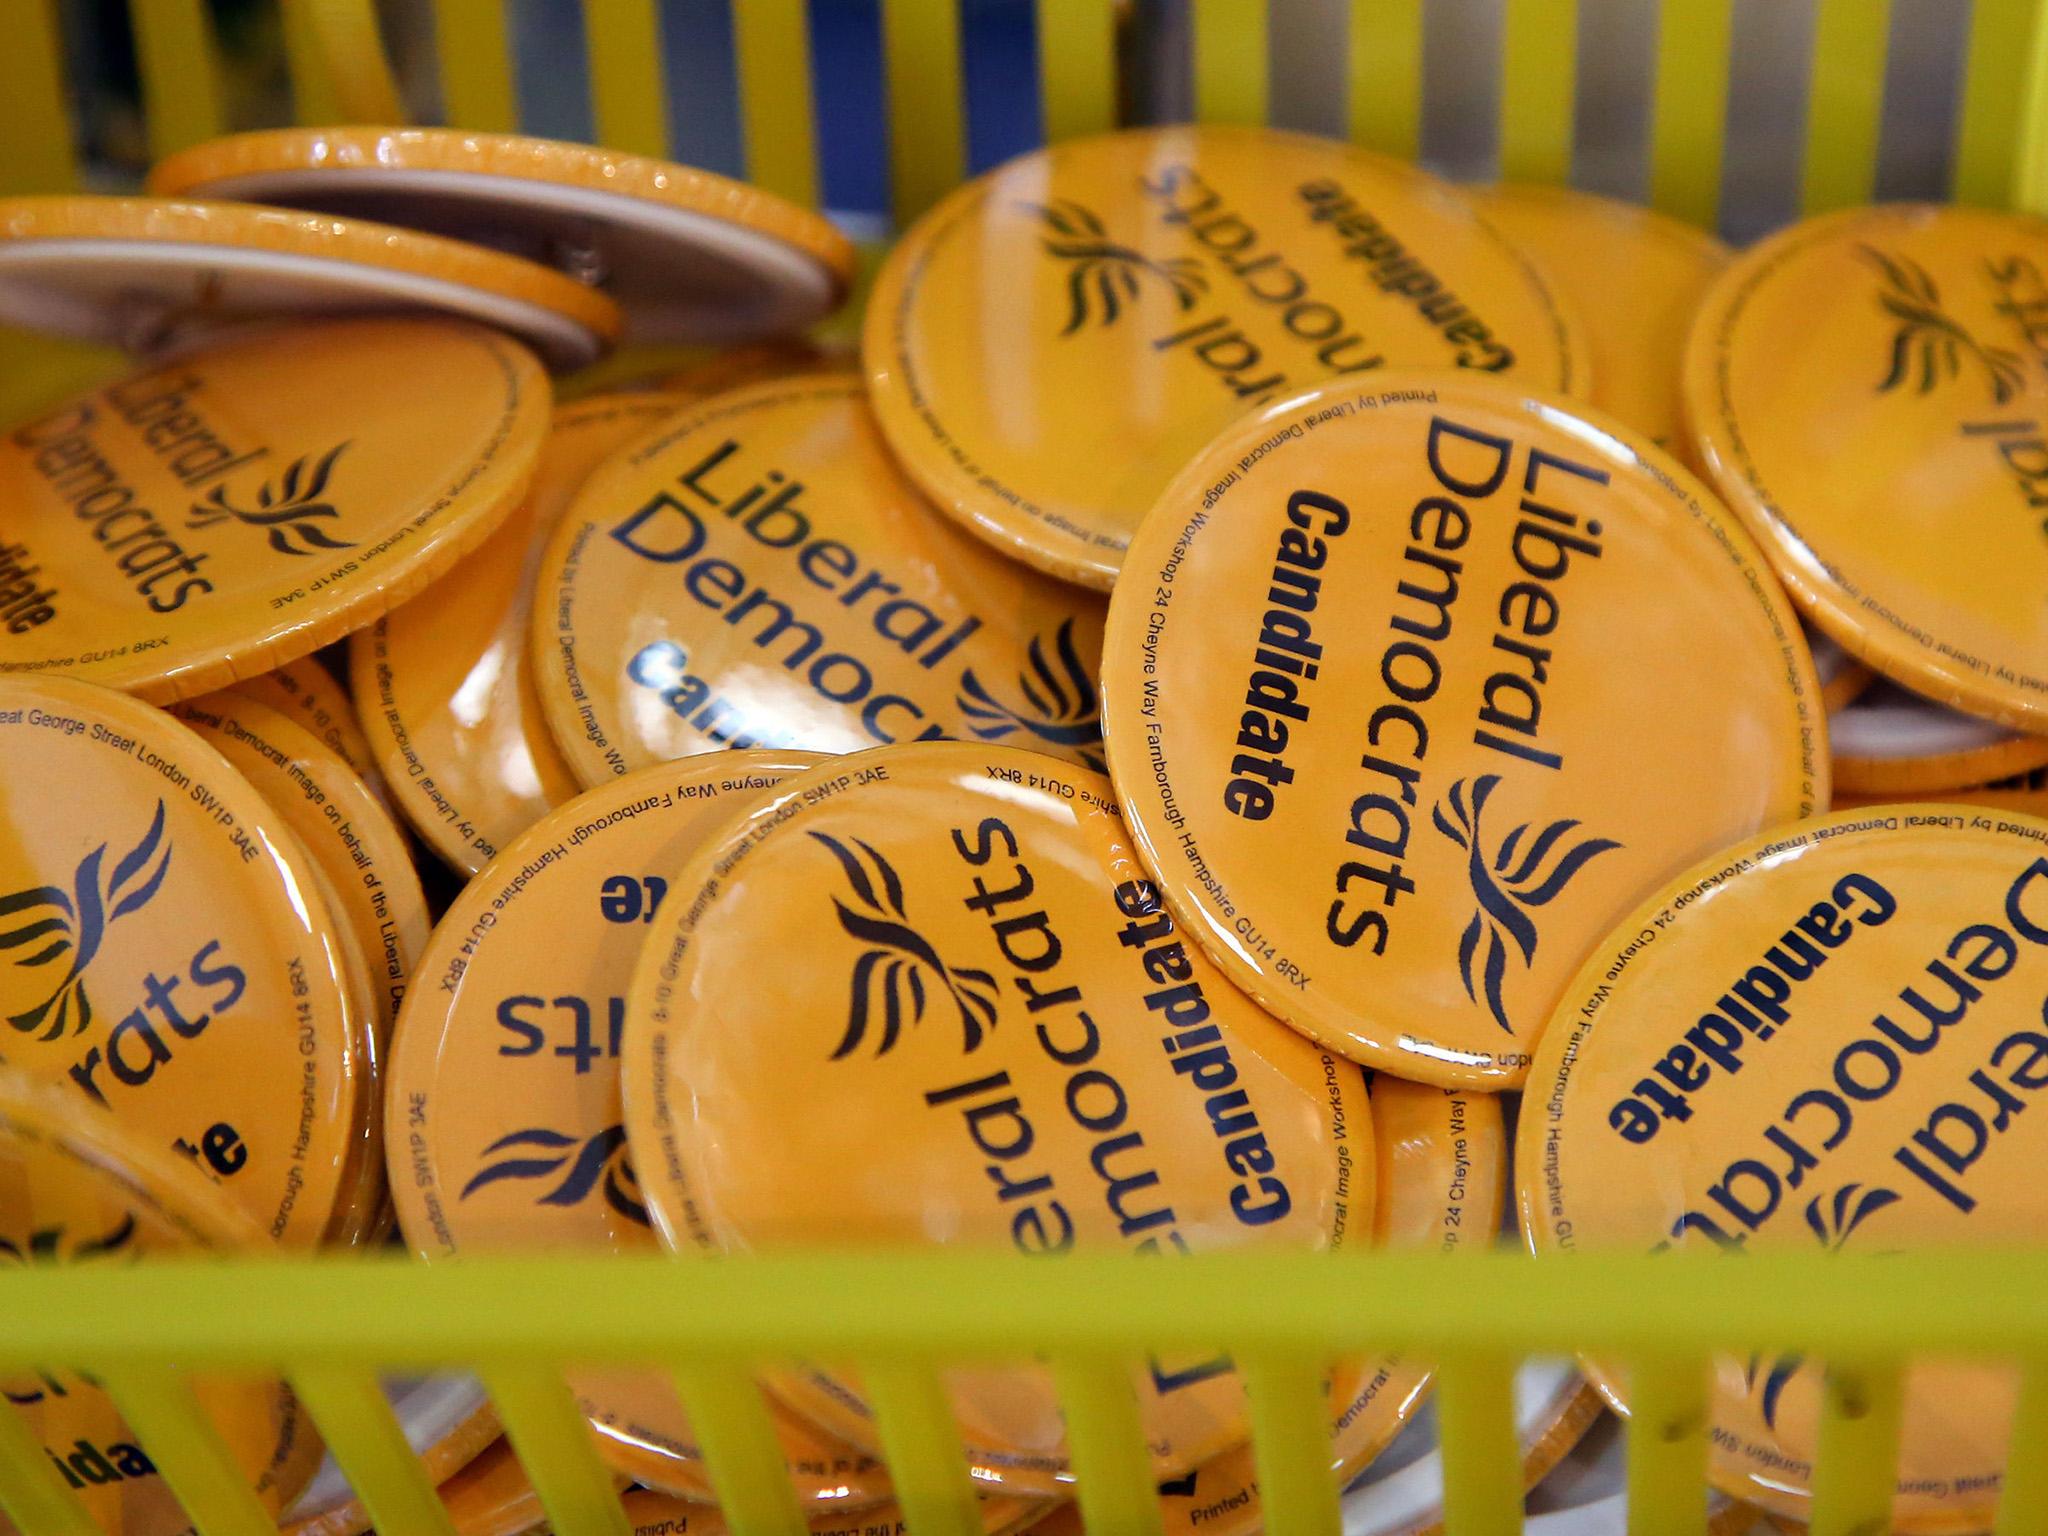 High Leave voting hotspots such as Redcar, Kettering, Rotherham, Staffordshire and Norfolk have seen significant Lib Dem gains